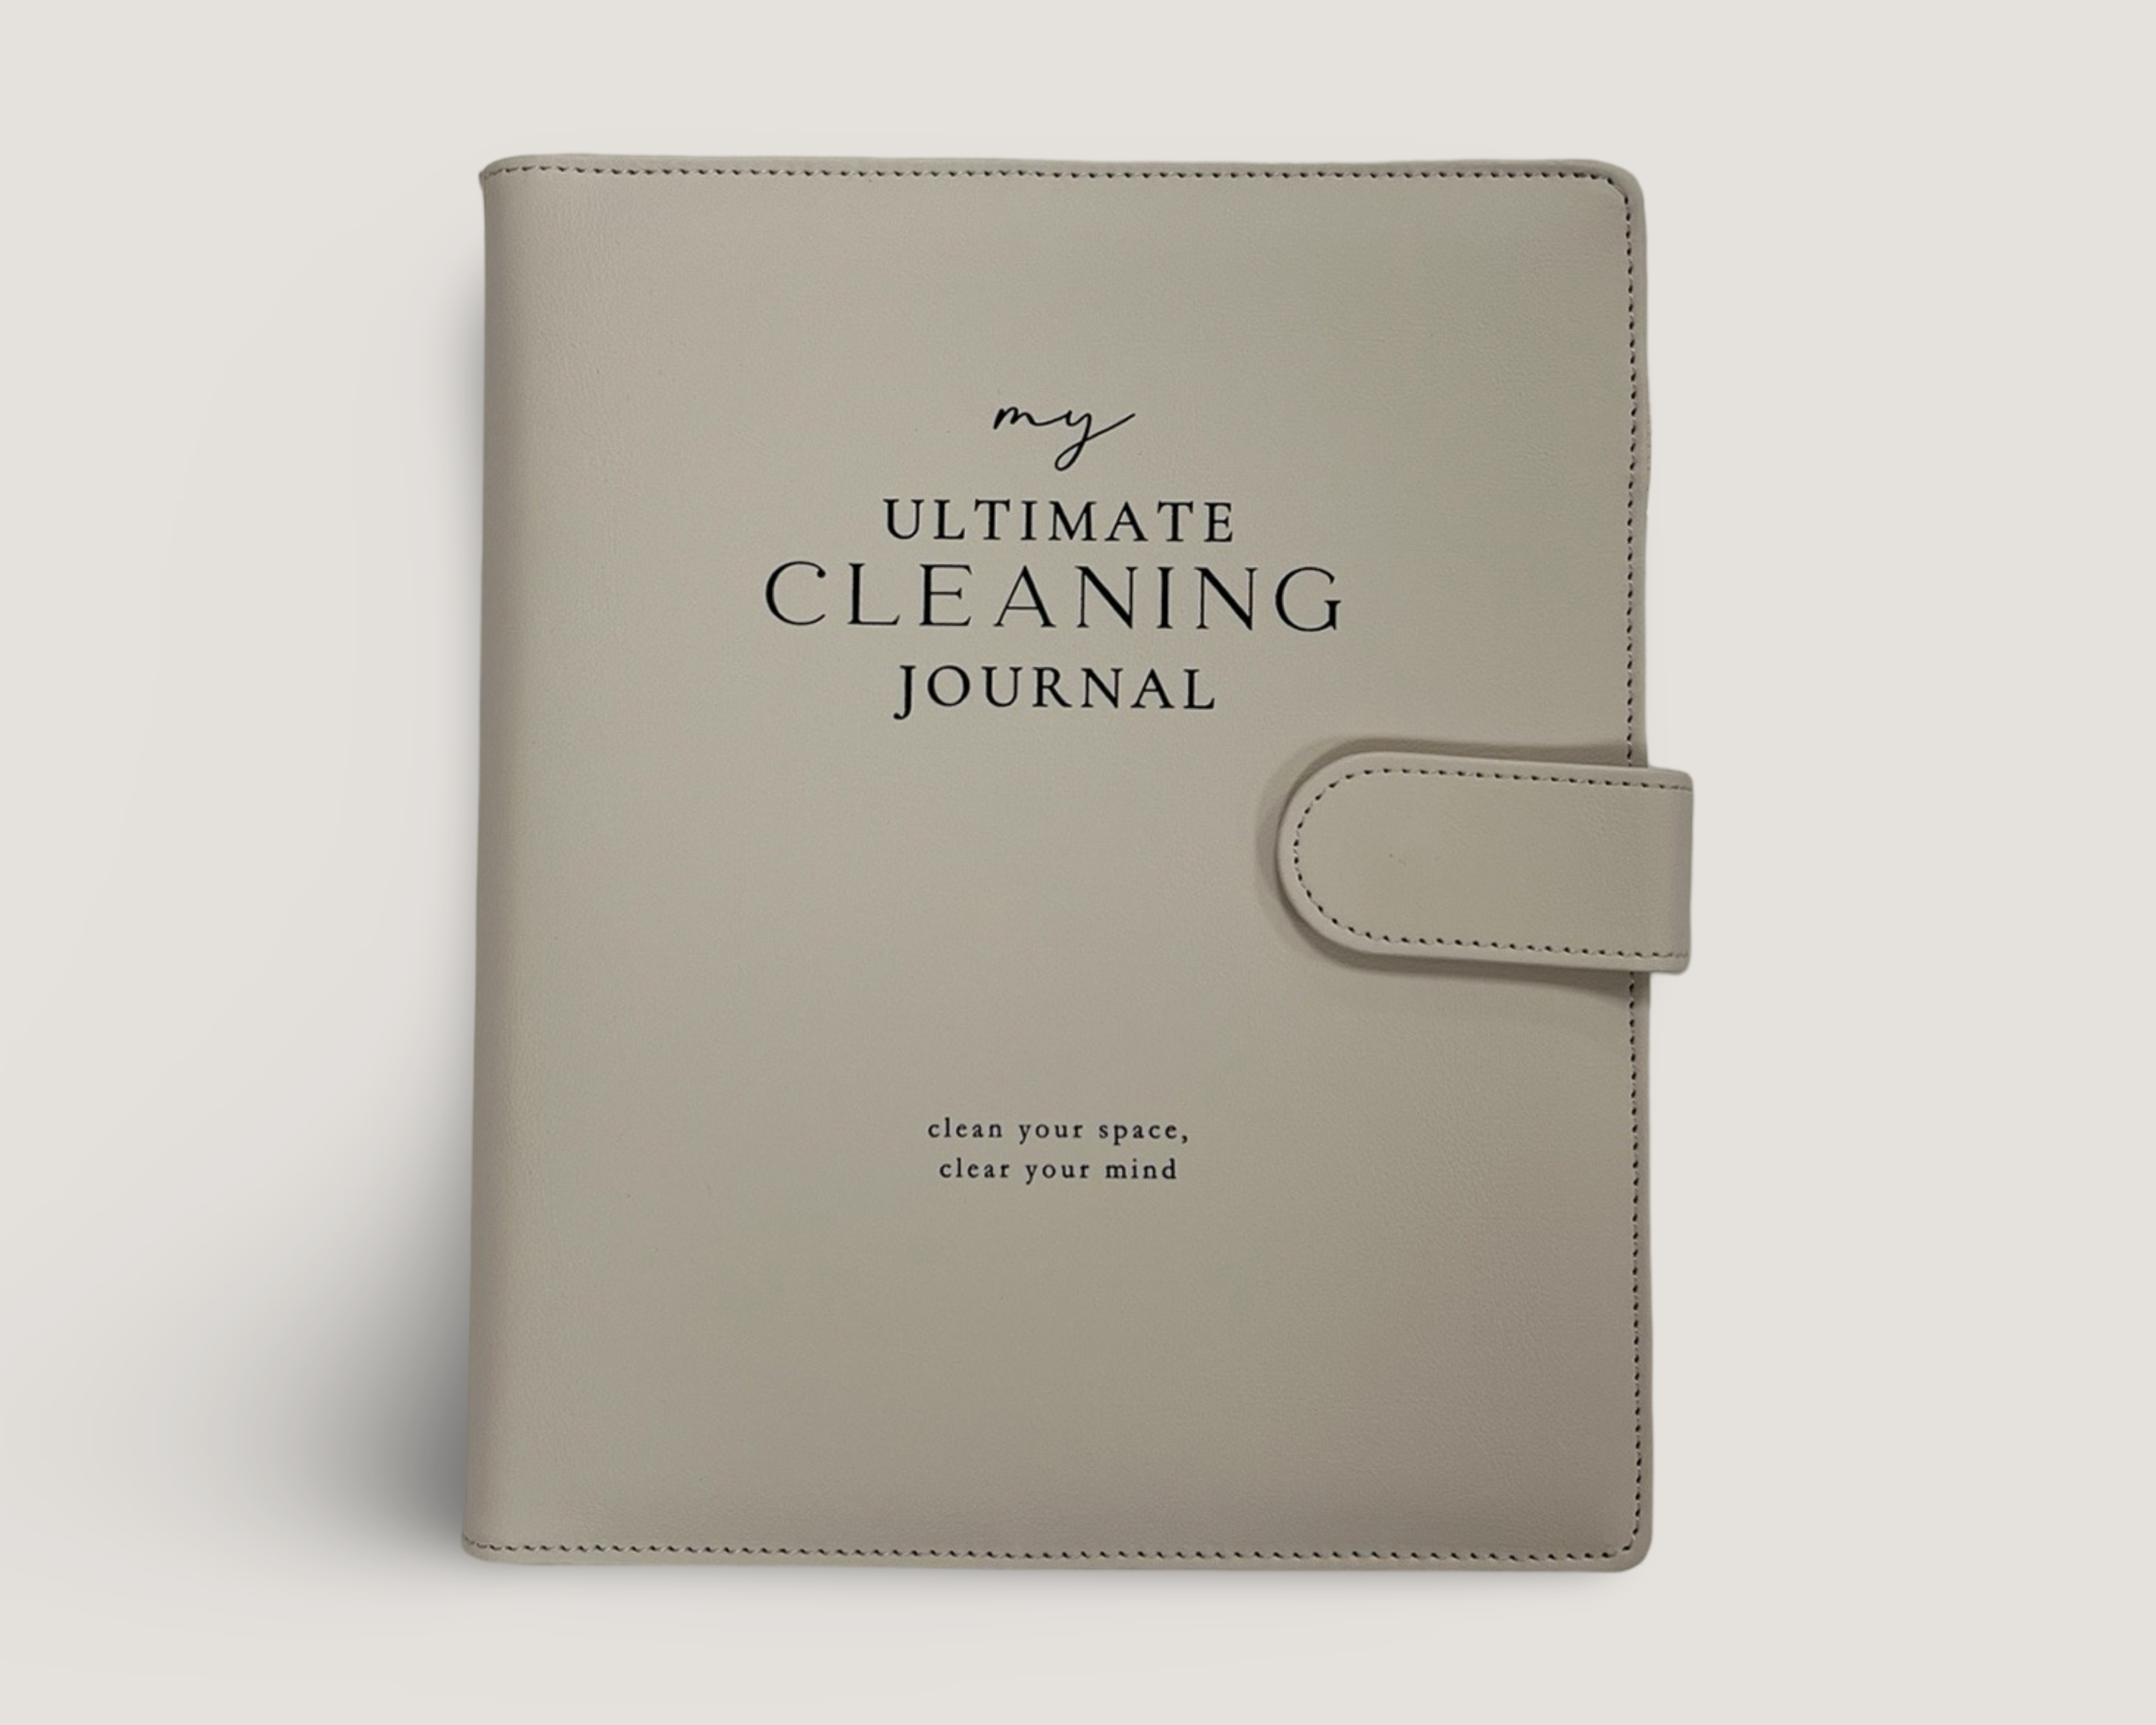 My Ultimate Cleaning Journal